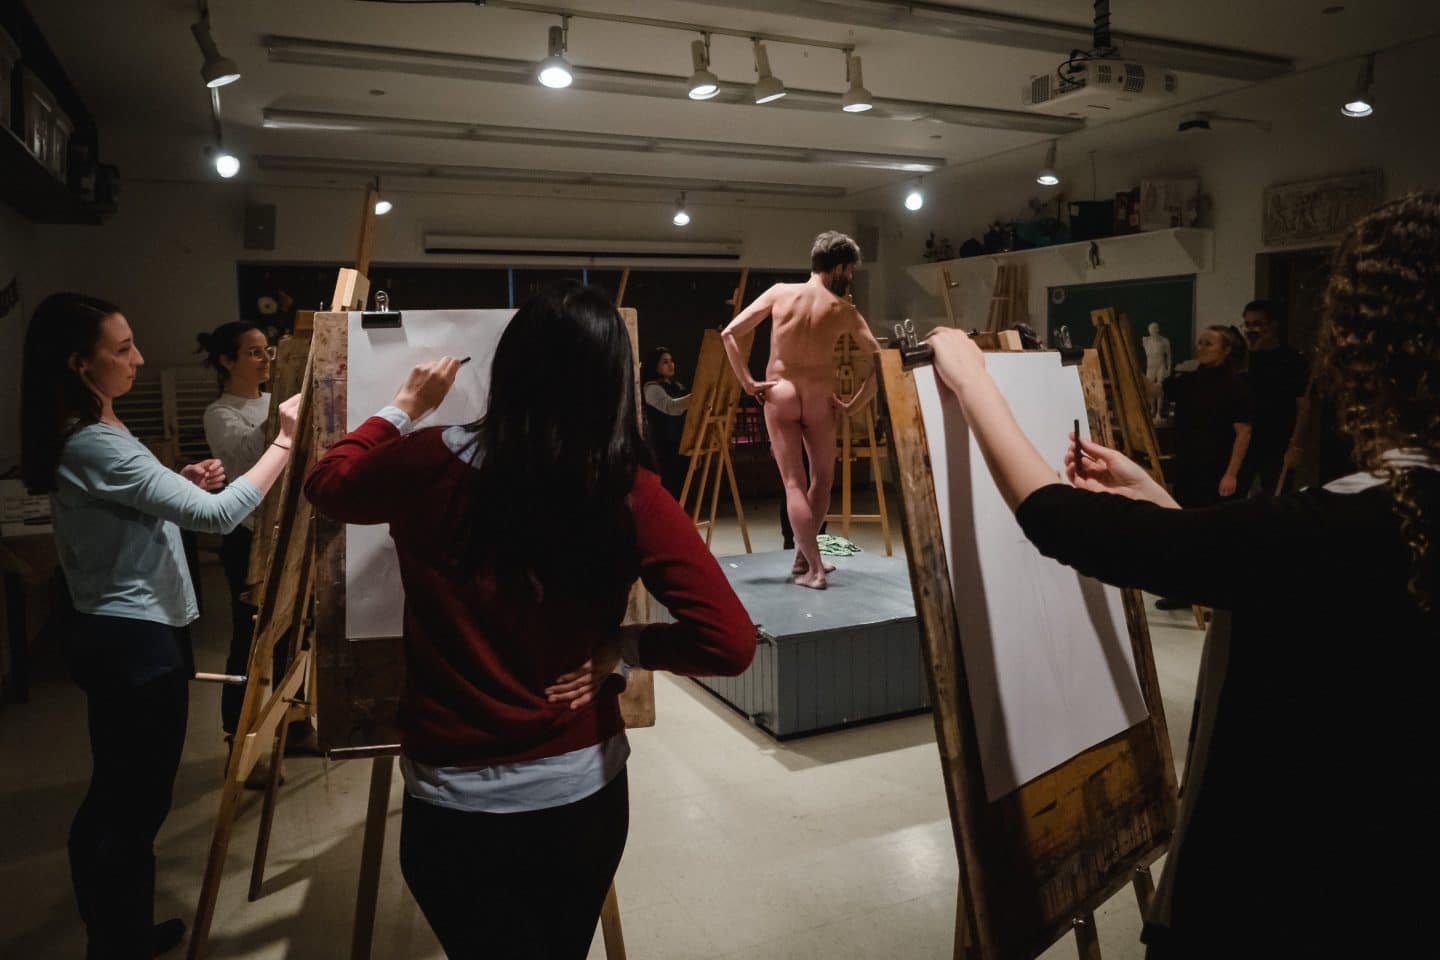 Artist Daniel Hughes leads a life drawing class in the Studio, Winter 2020.